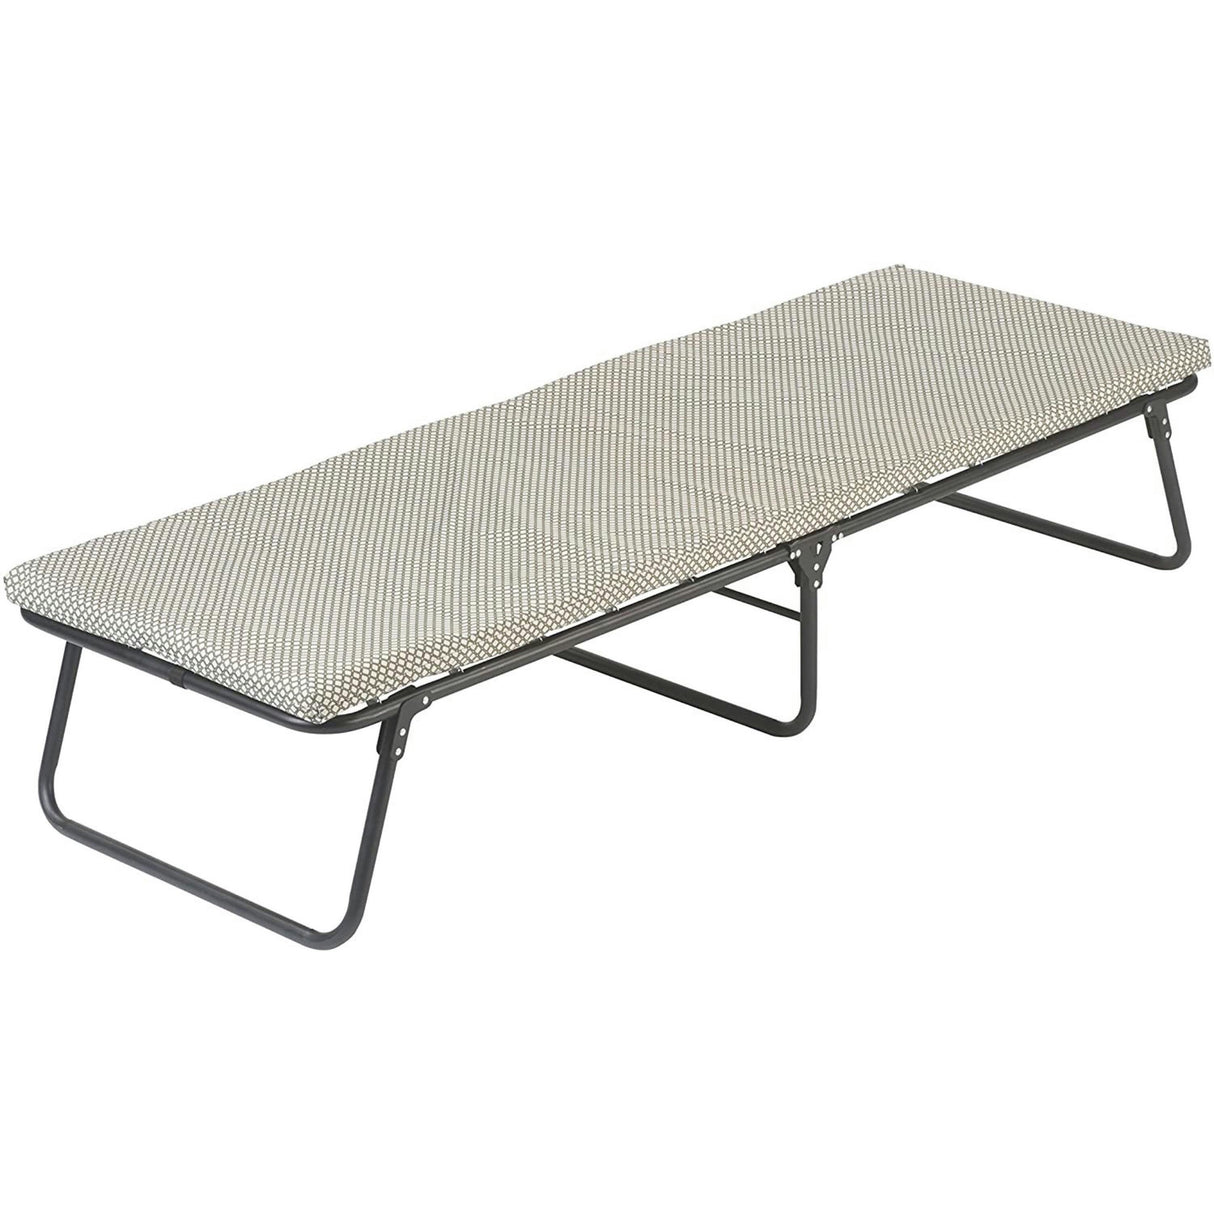 COLEMAN COMFORTSMART CAMPING COT WITH SLEEPING PAD GREY